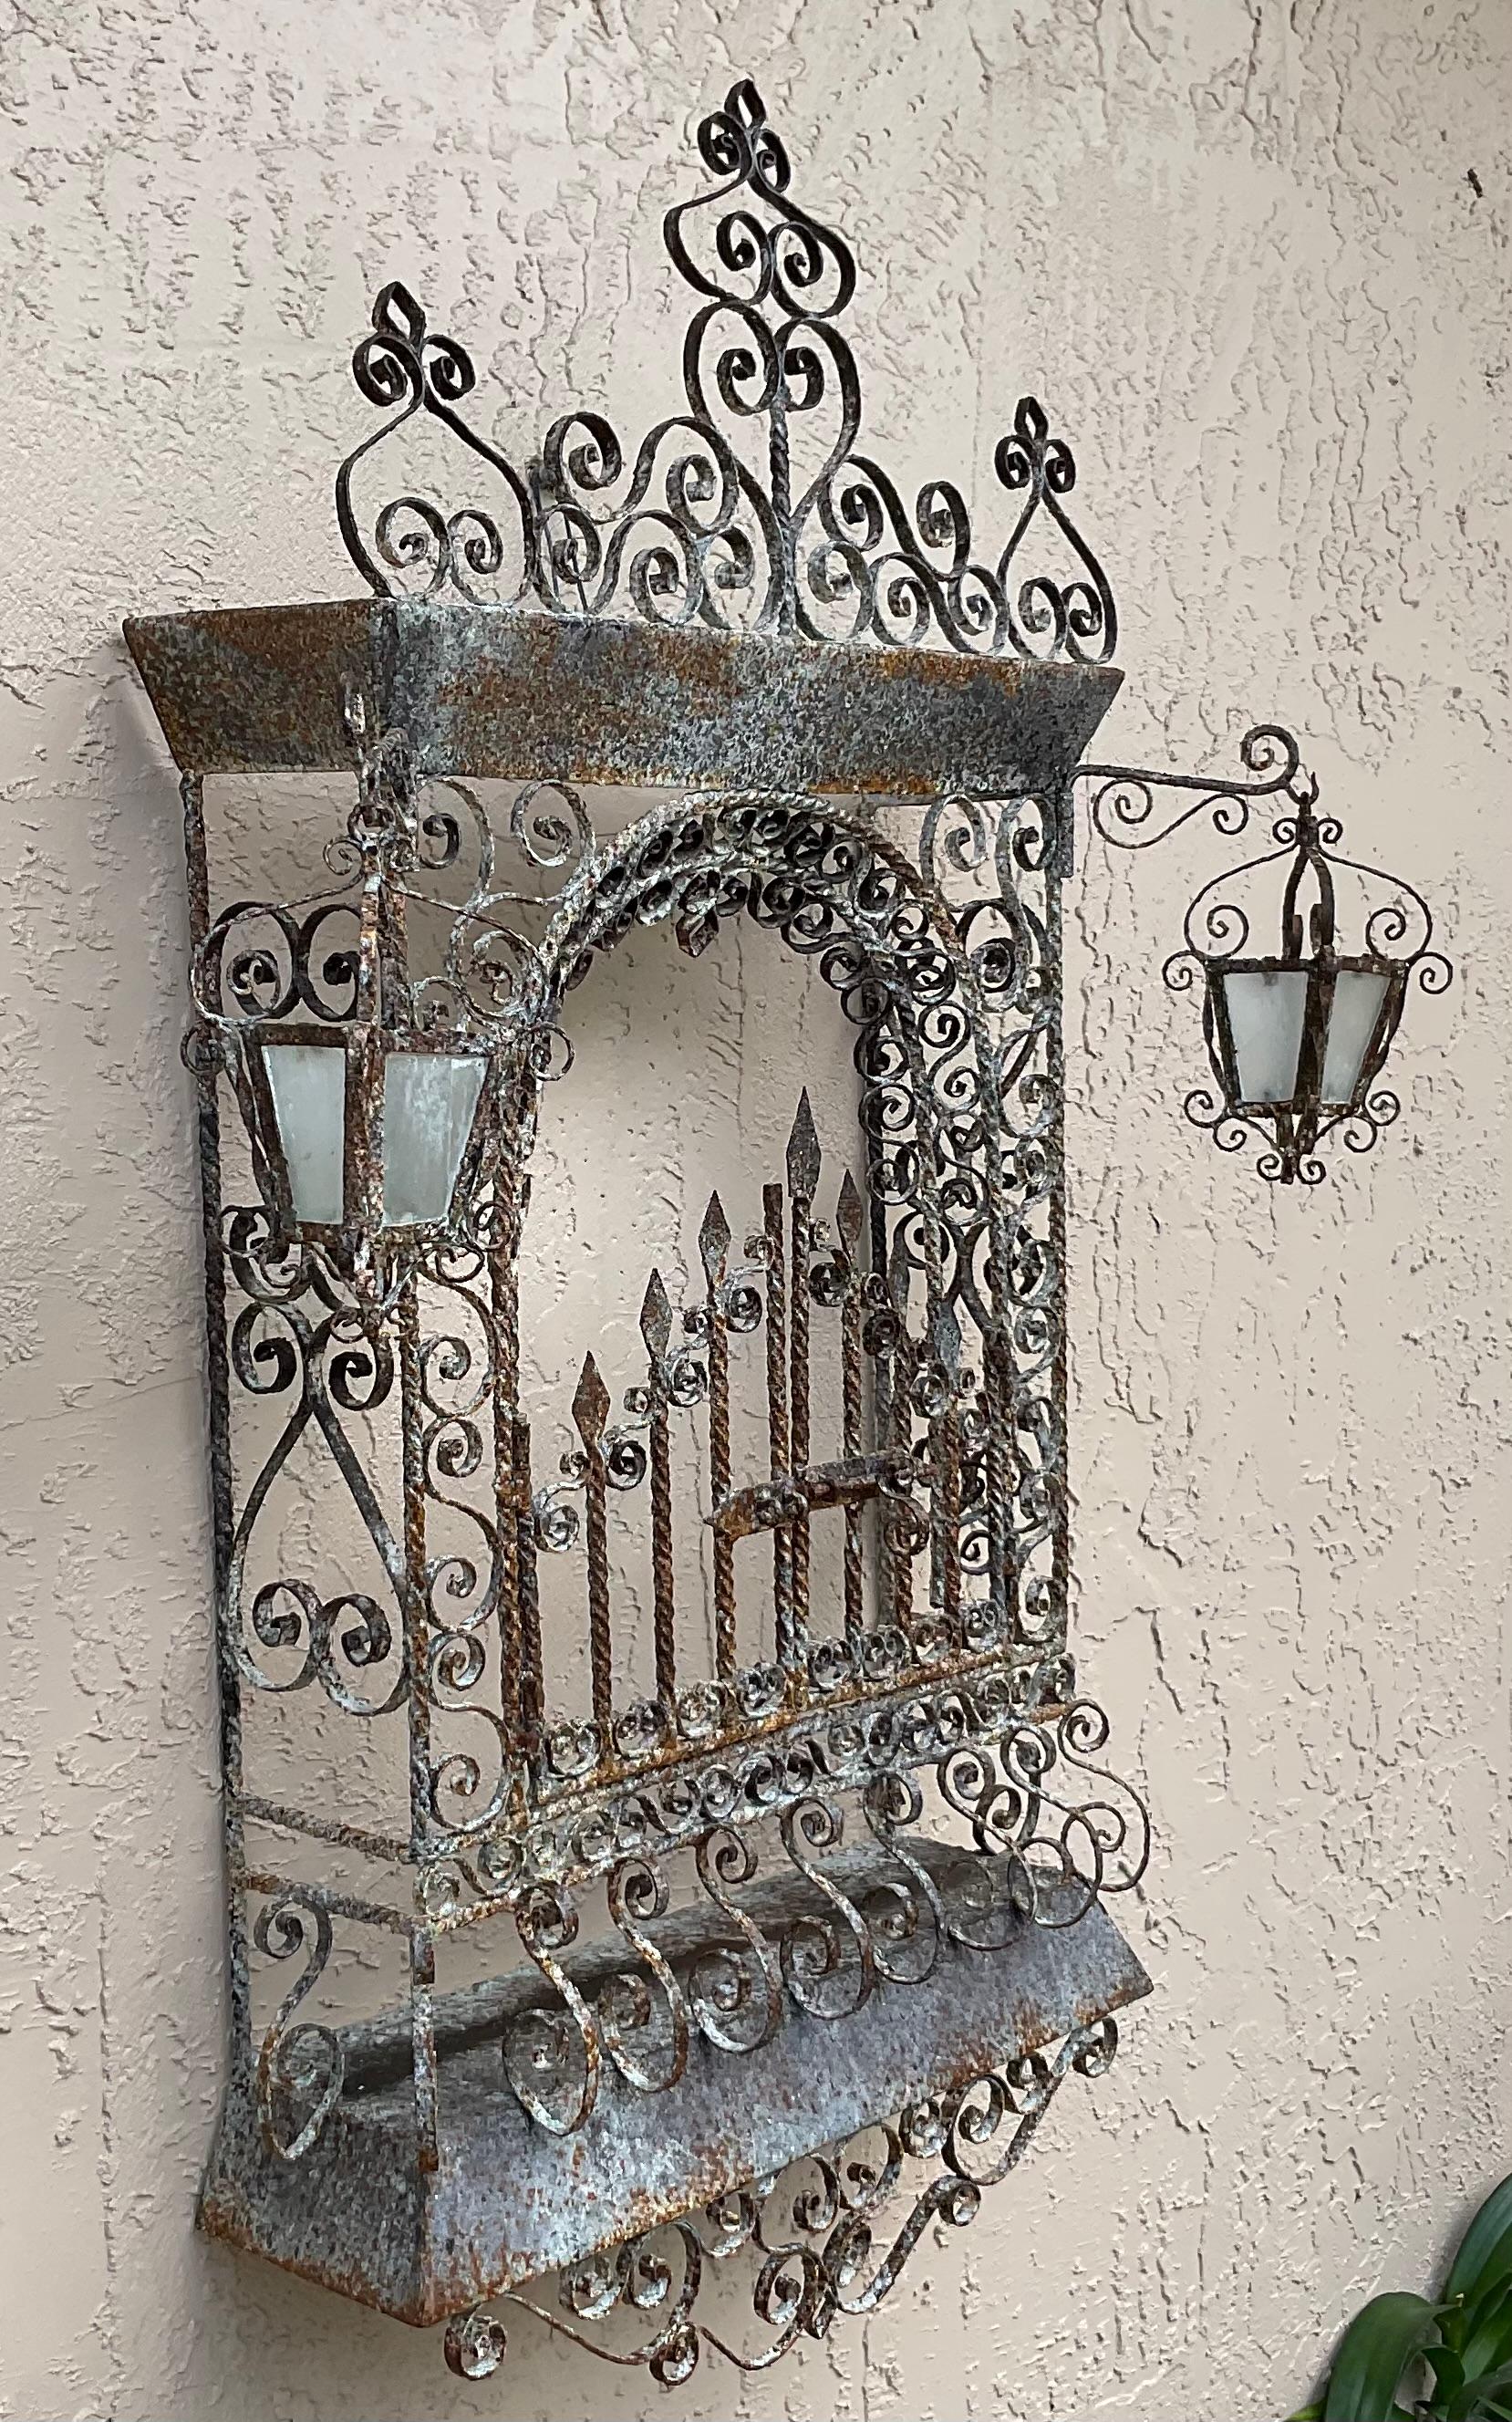 20th Century Vintage Wall Hanging Palm Beach Wrought Iron Gate Mizner Style For Sale